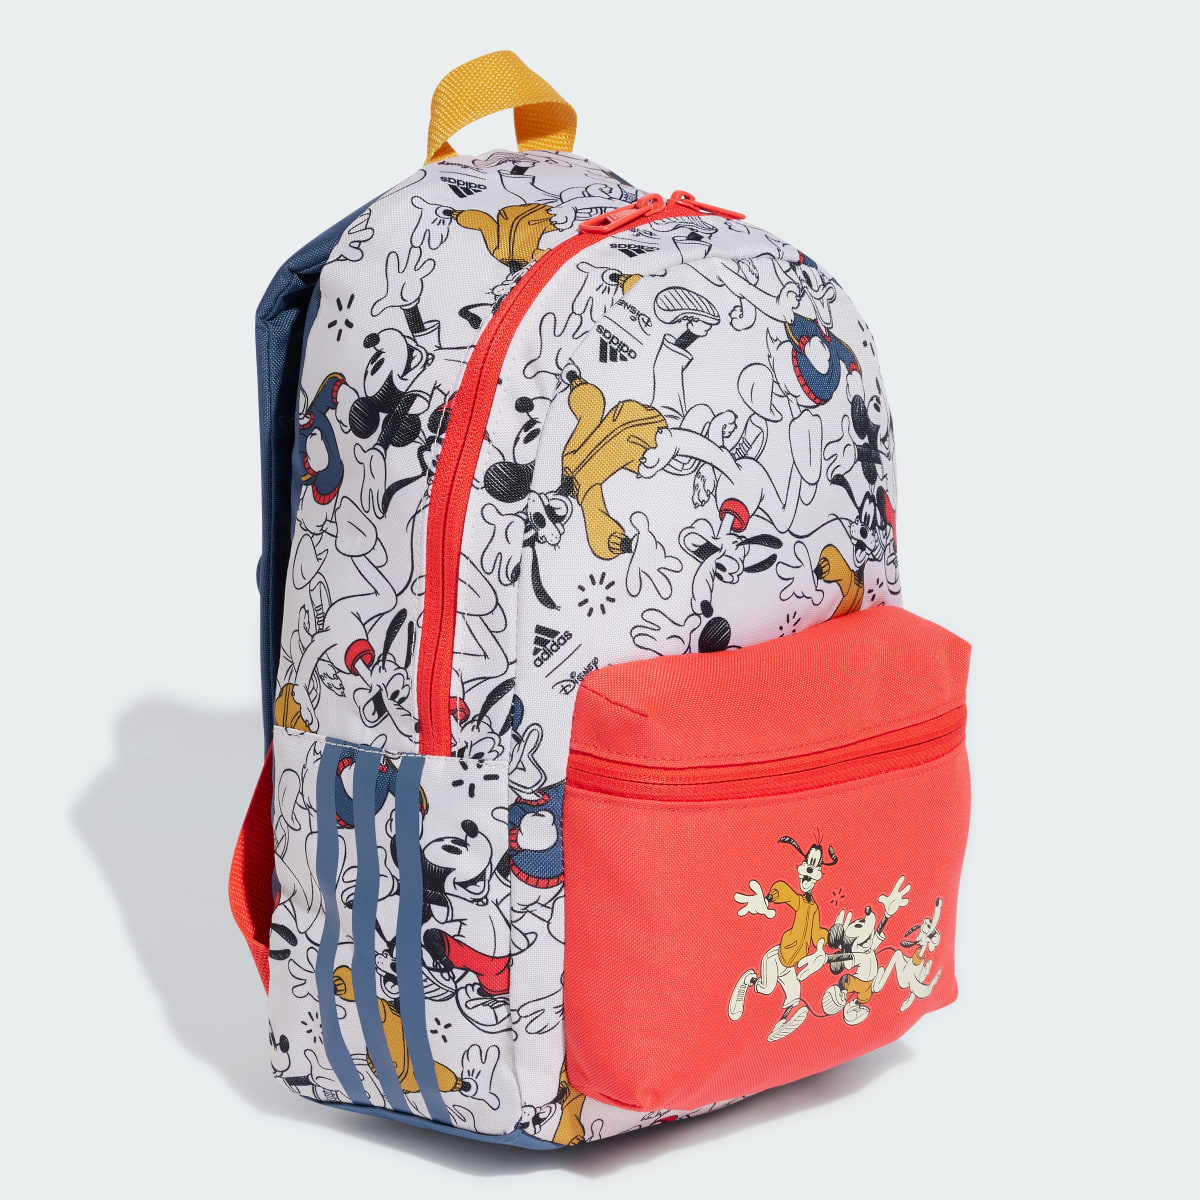 Adidas Disney's Mickey Mouse Backpack. 4